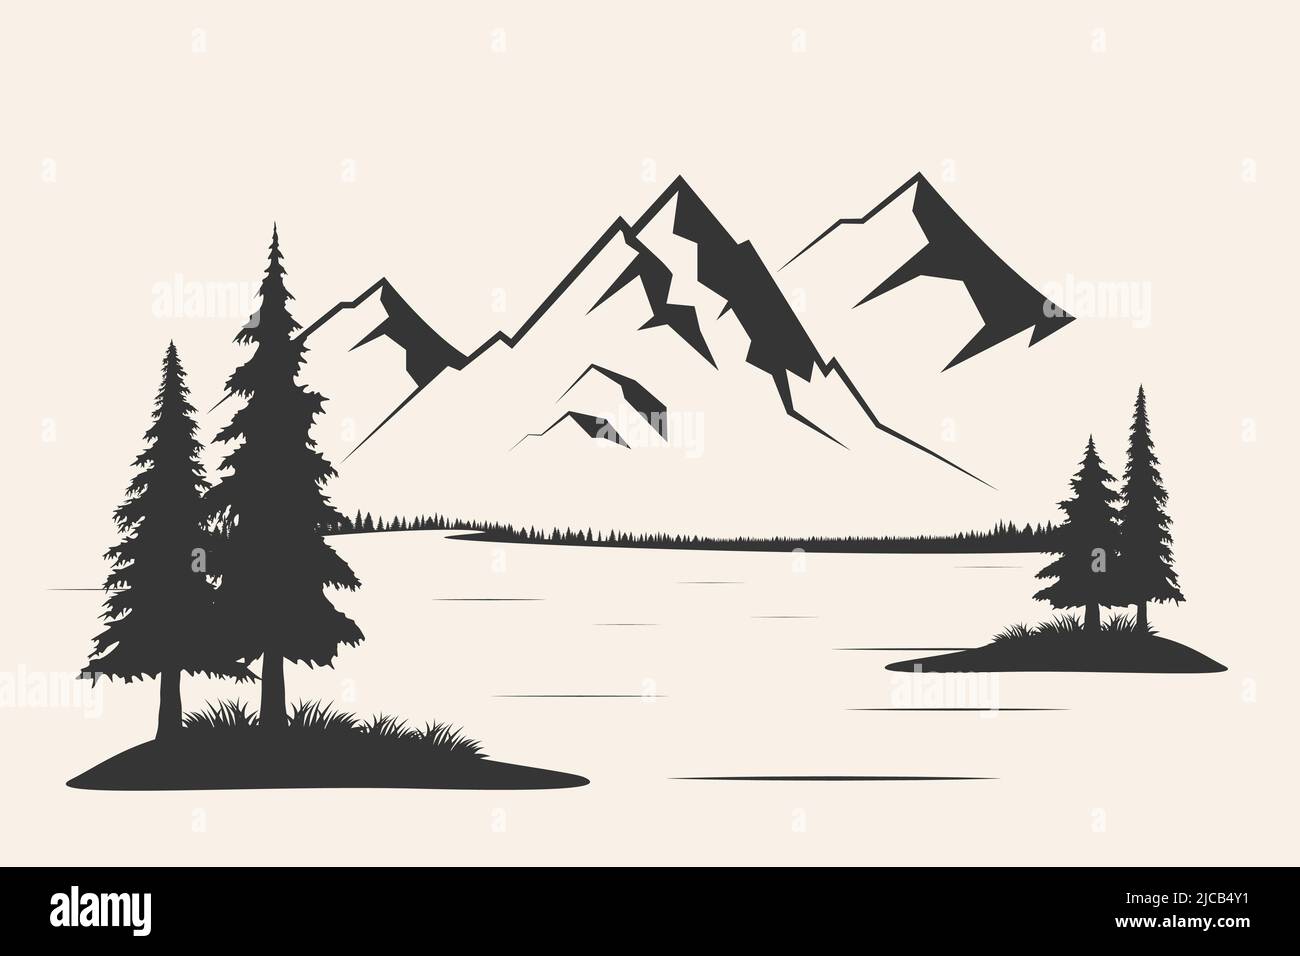 Mountain with pine trees and landscape black on white background ...